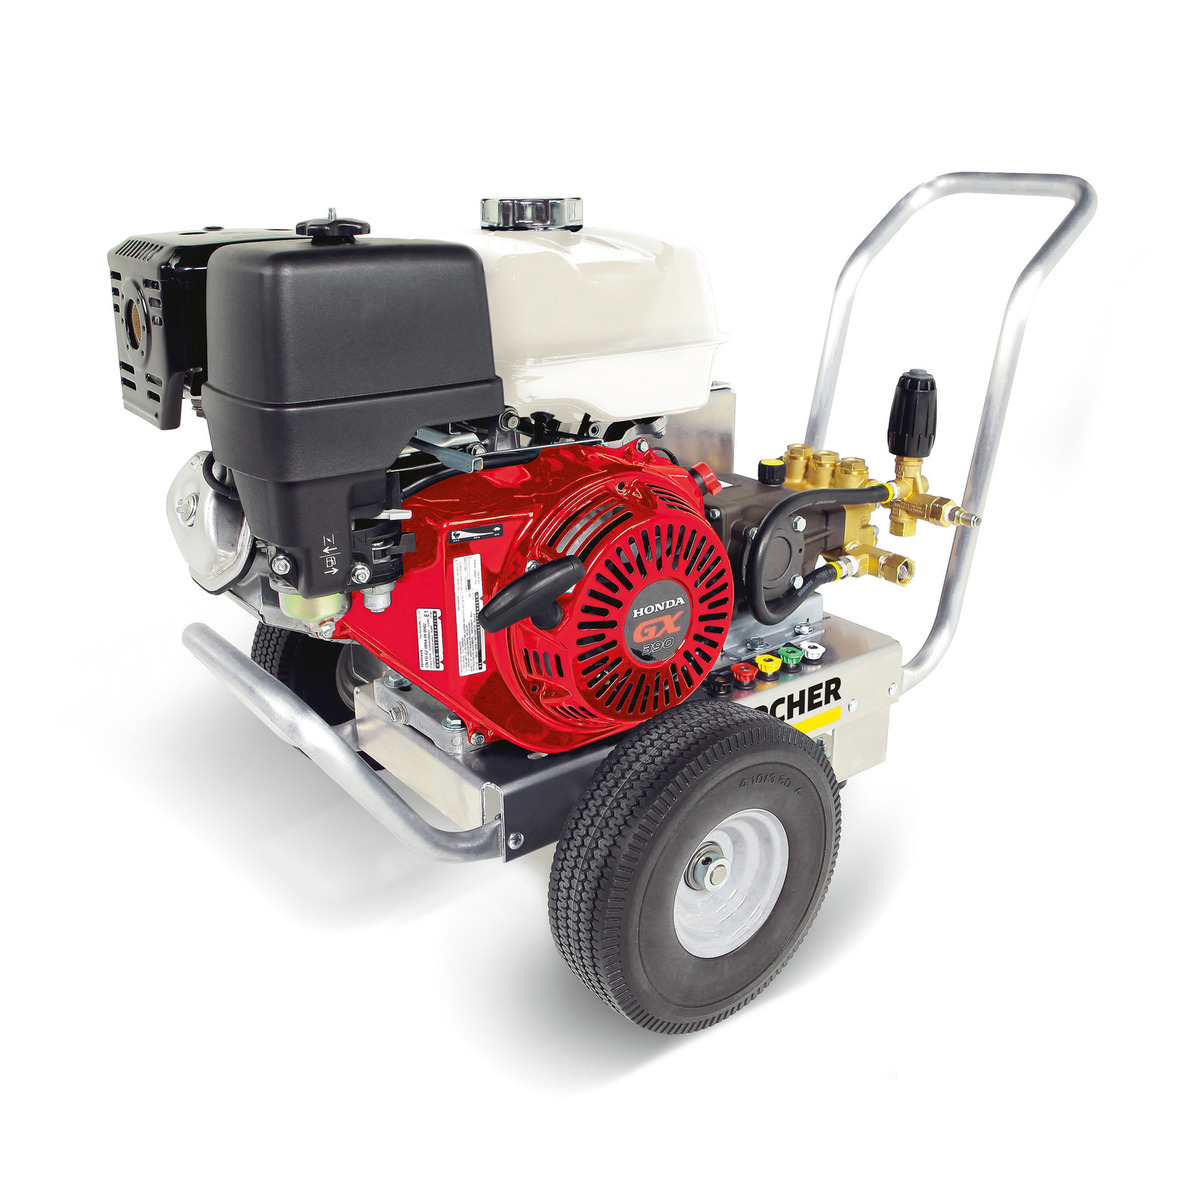 Heavy-Duty 4000PSI Gas-Powered Cold Water Pressure Washer - Cleaning & Pressure Washers